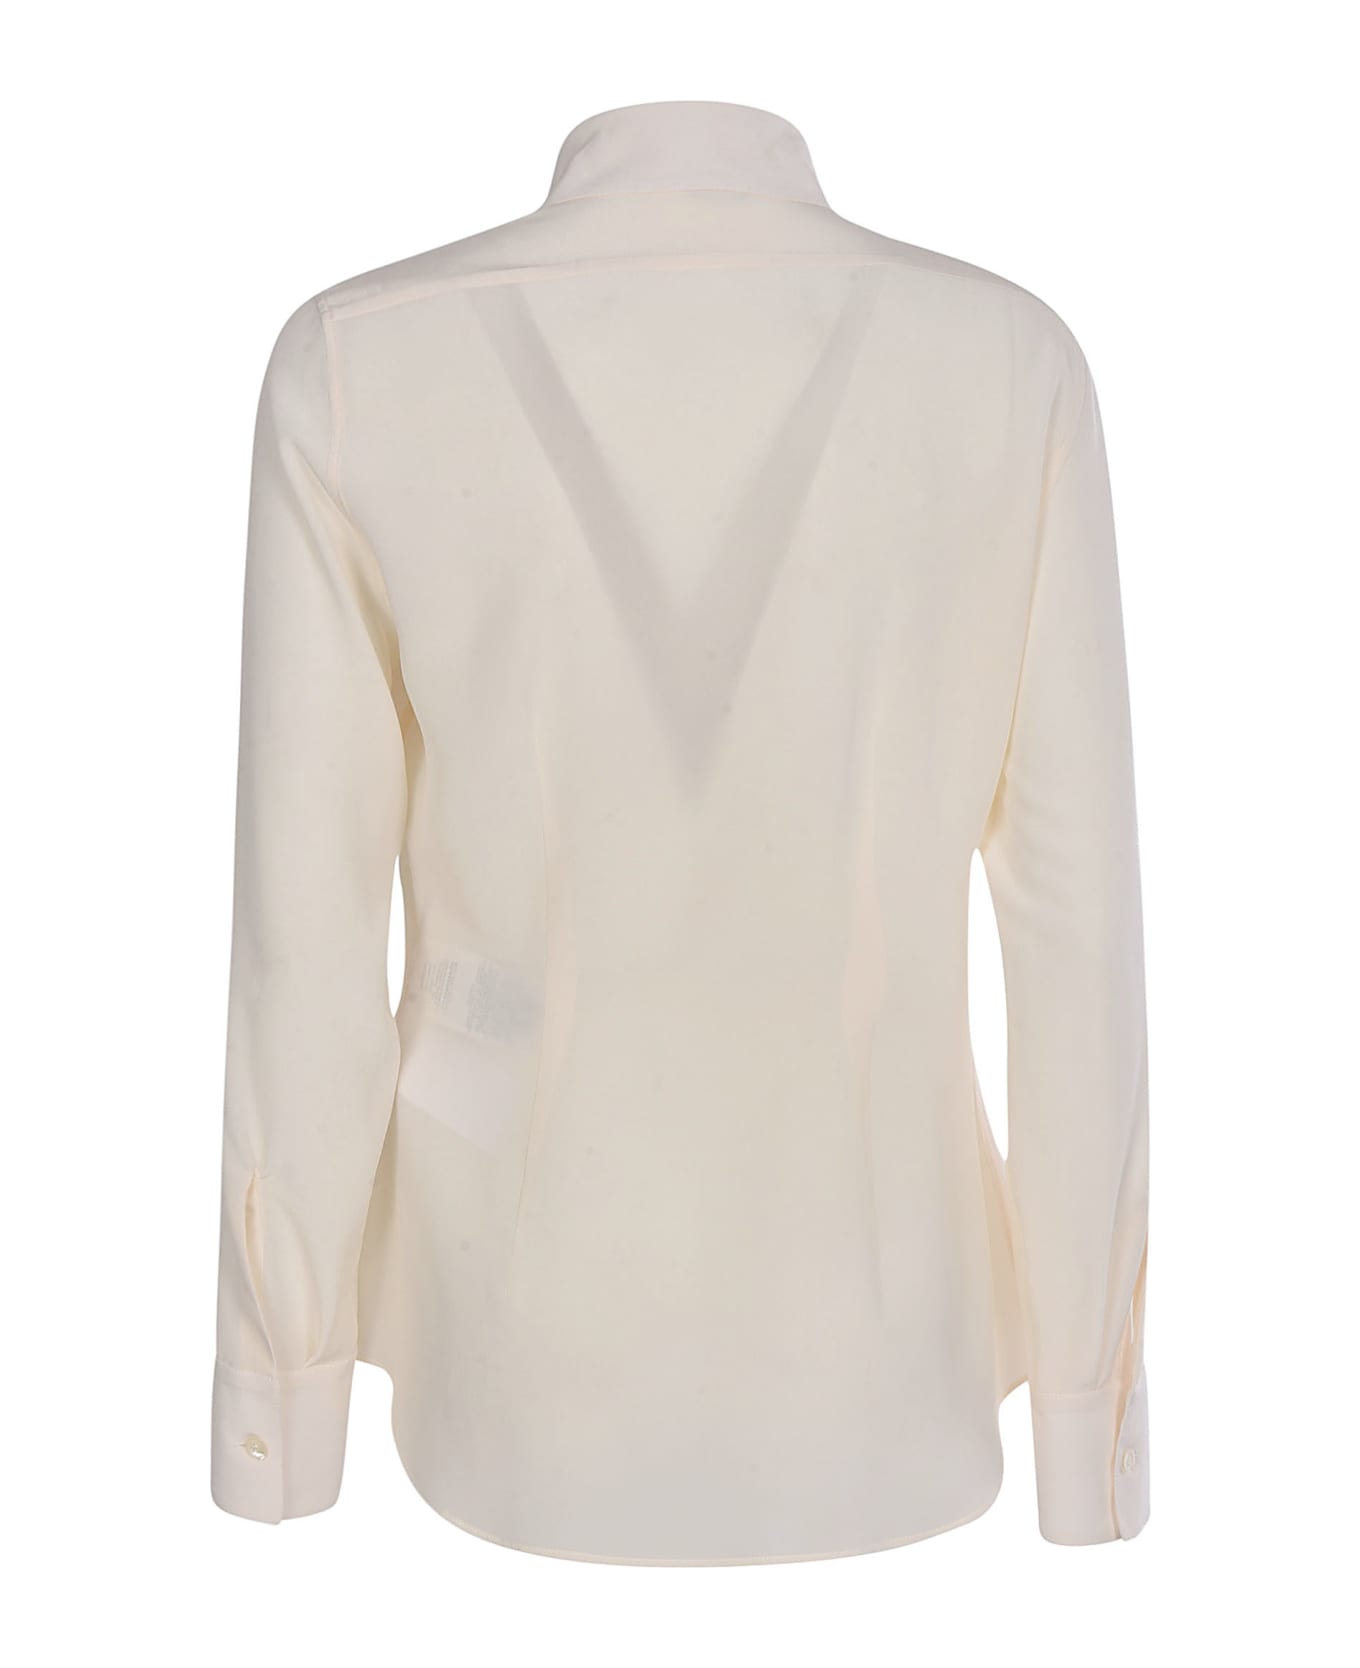 Stella McCartney It's Too Late To Go To Bed Shirt - Offwhite シャツ